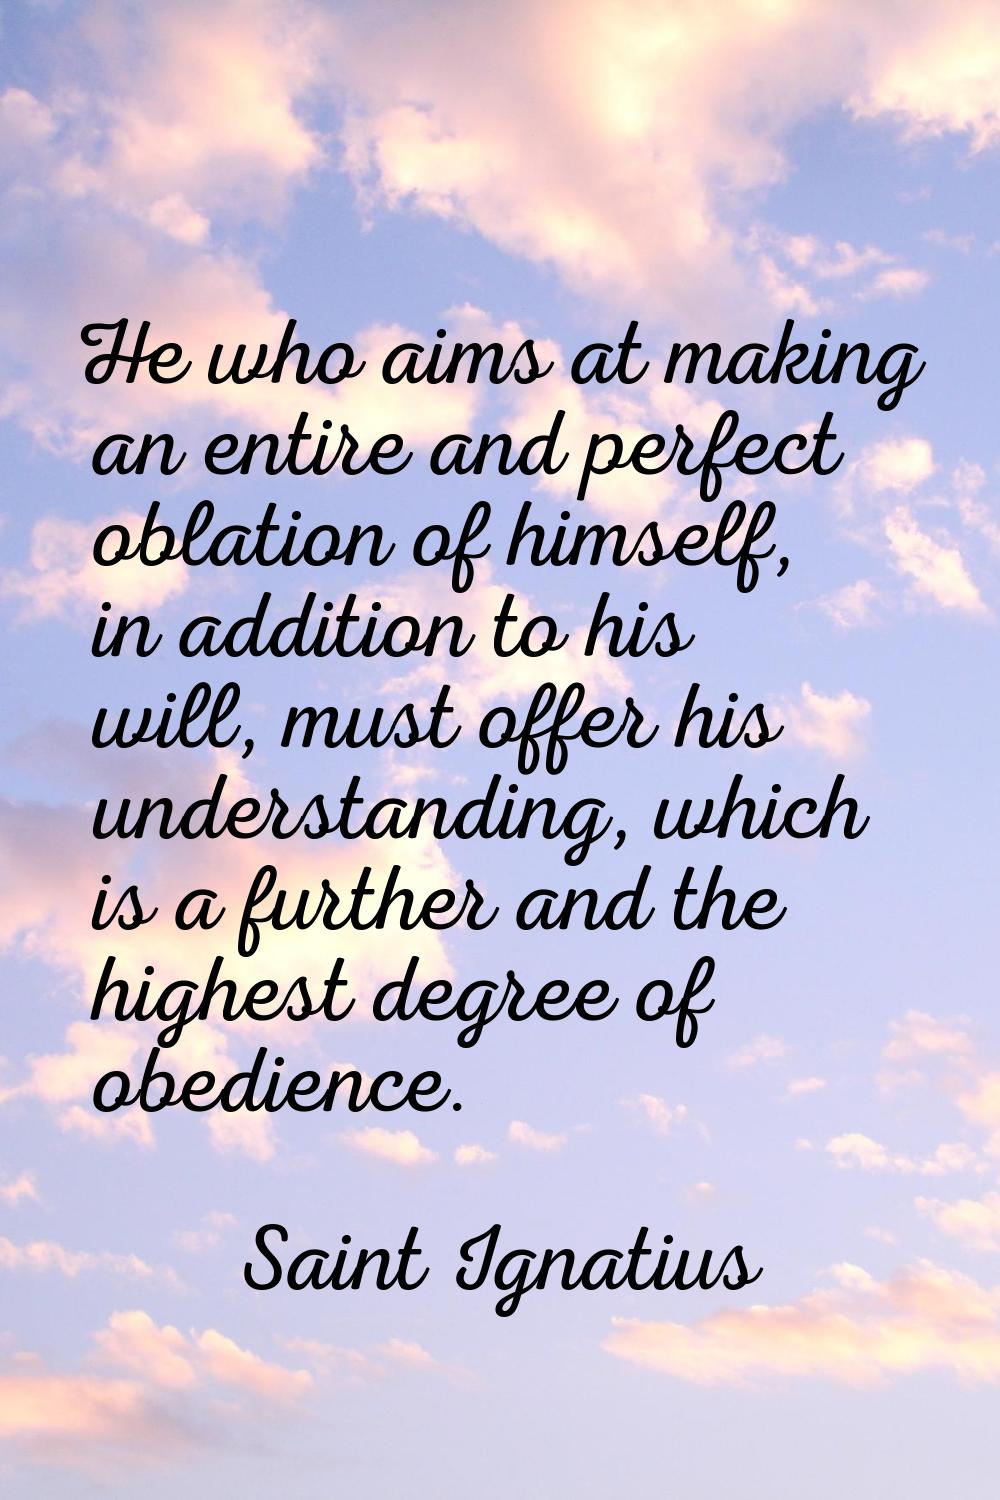 He who aims at making an entire and perfect oblation of himself, in addition to his will, must offe